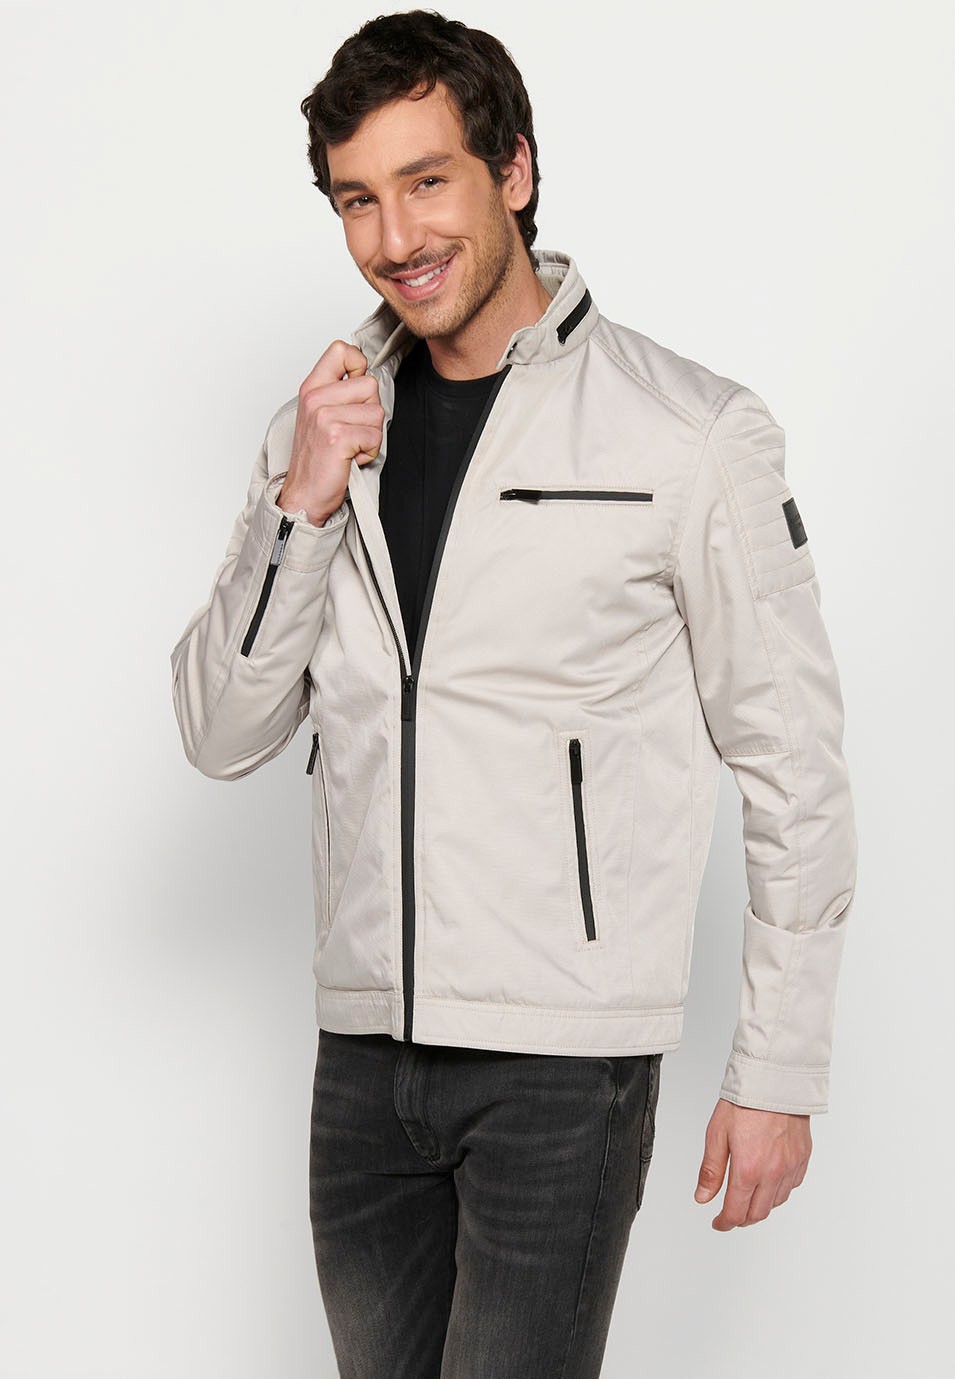 Beige Long-sleeved Jacket with Round Neck and Front Zipper Closure for Men 4